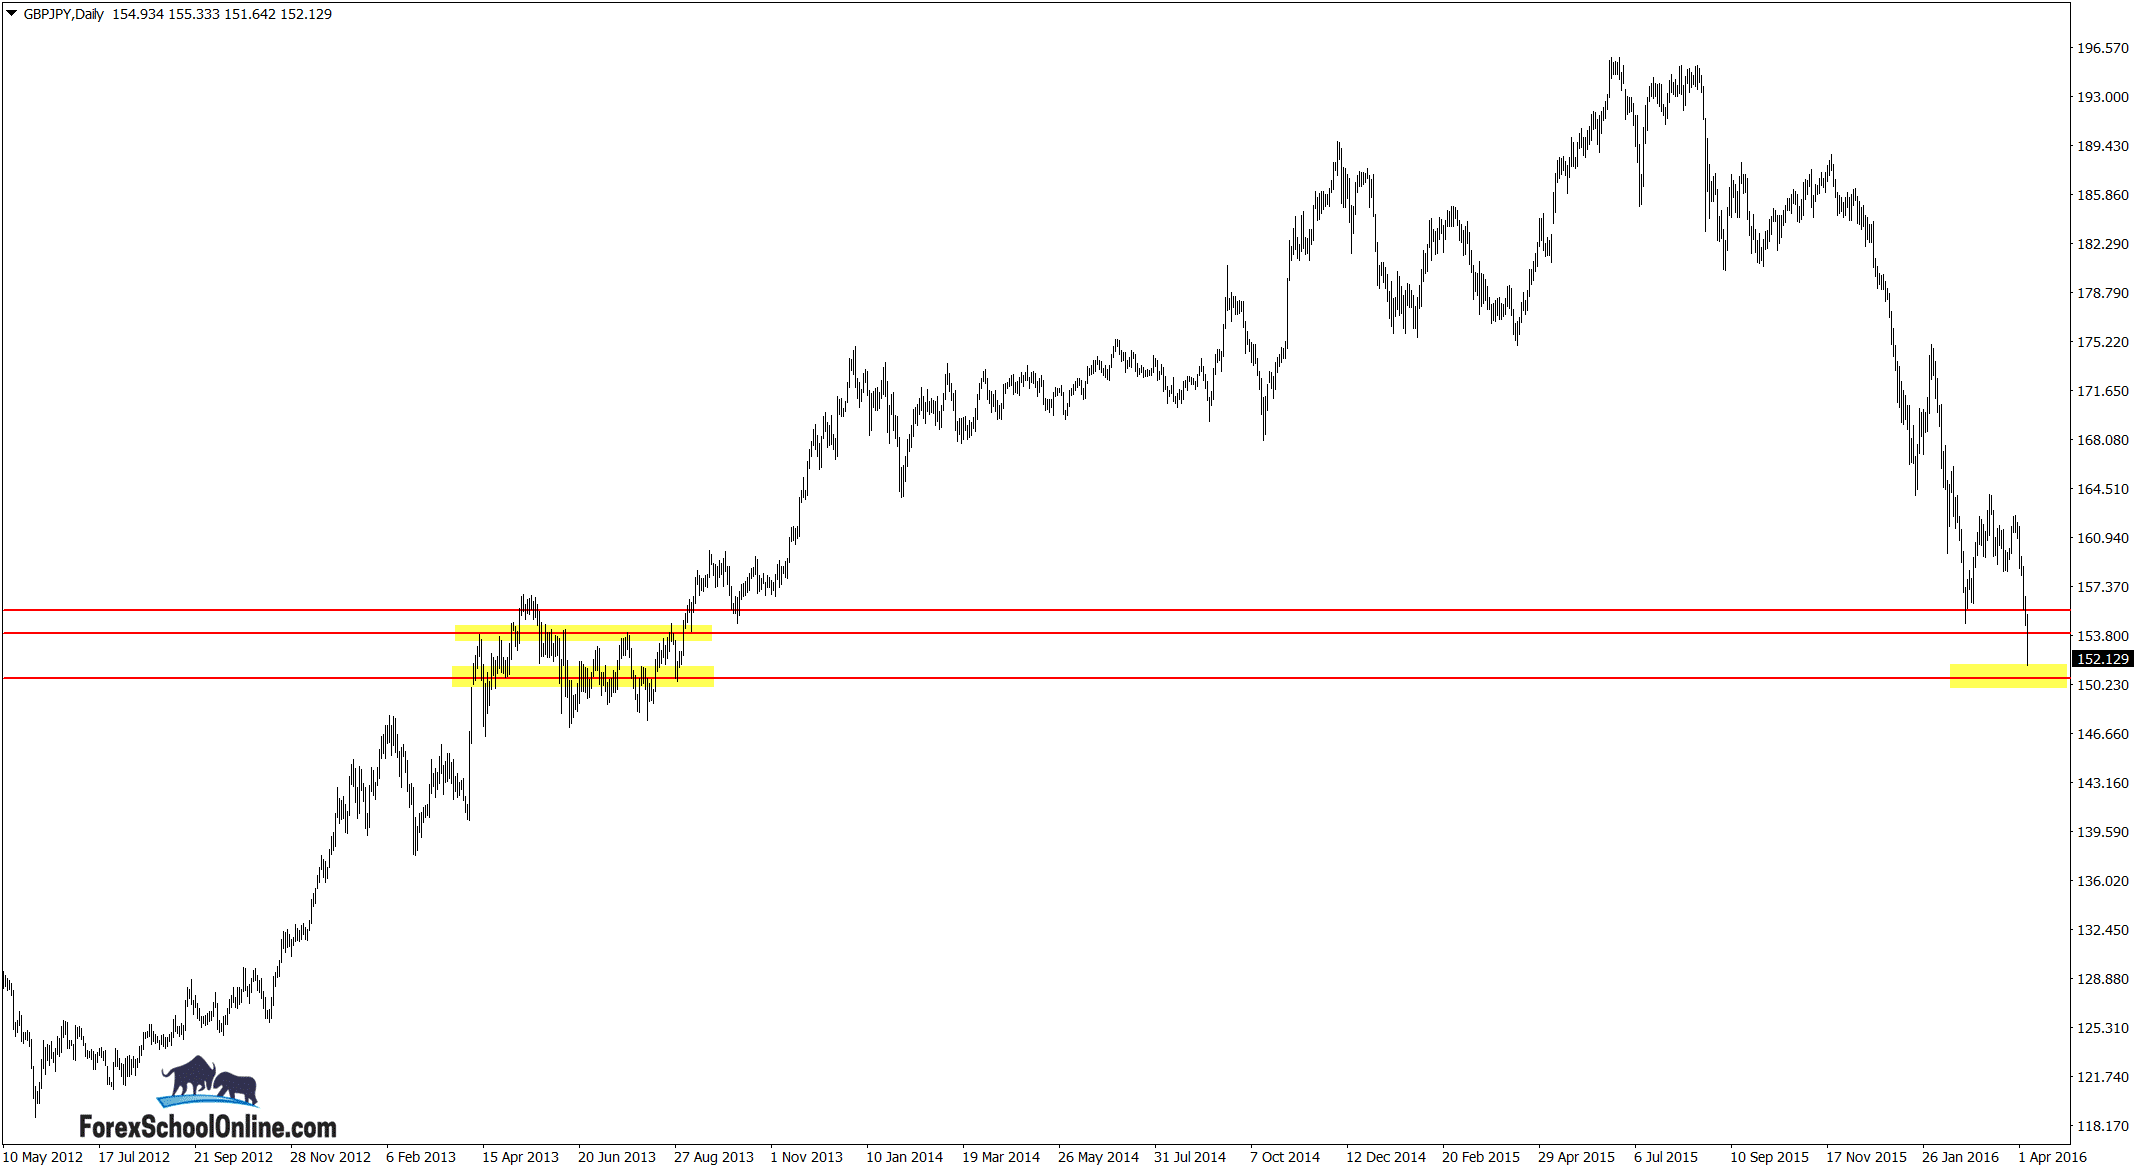 GBPJPY Zoomed out daily price action chart